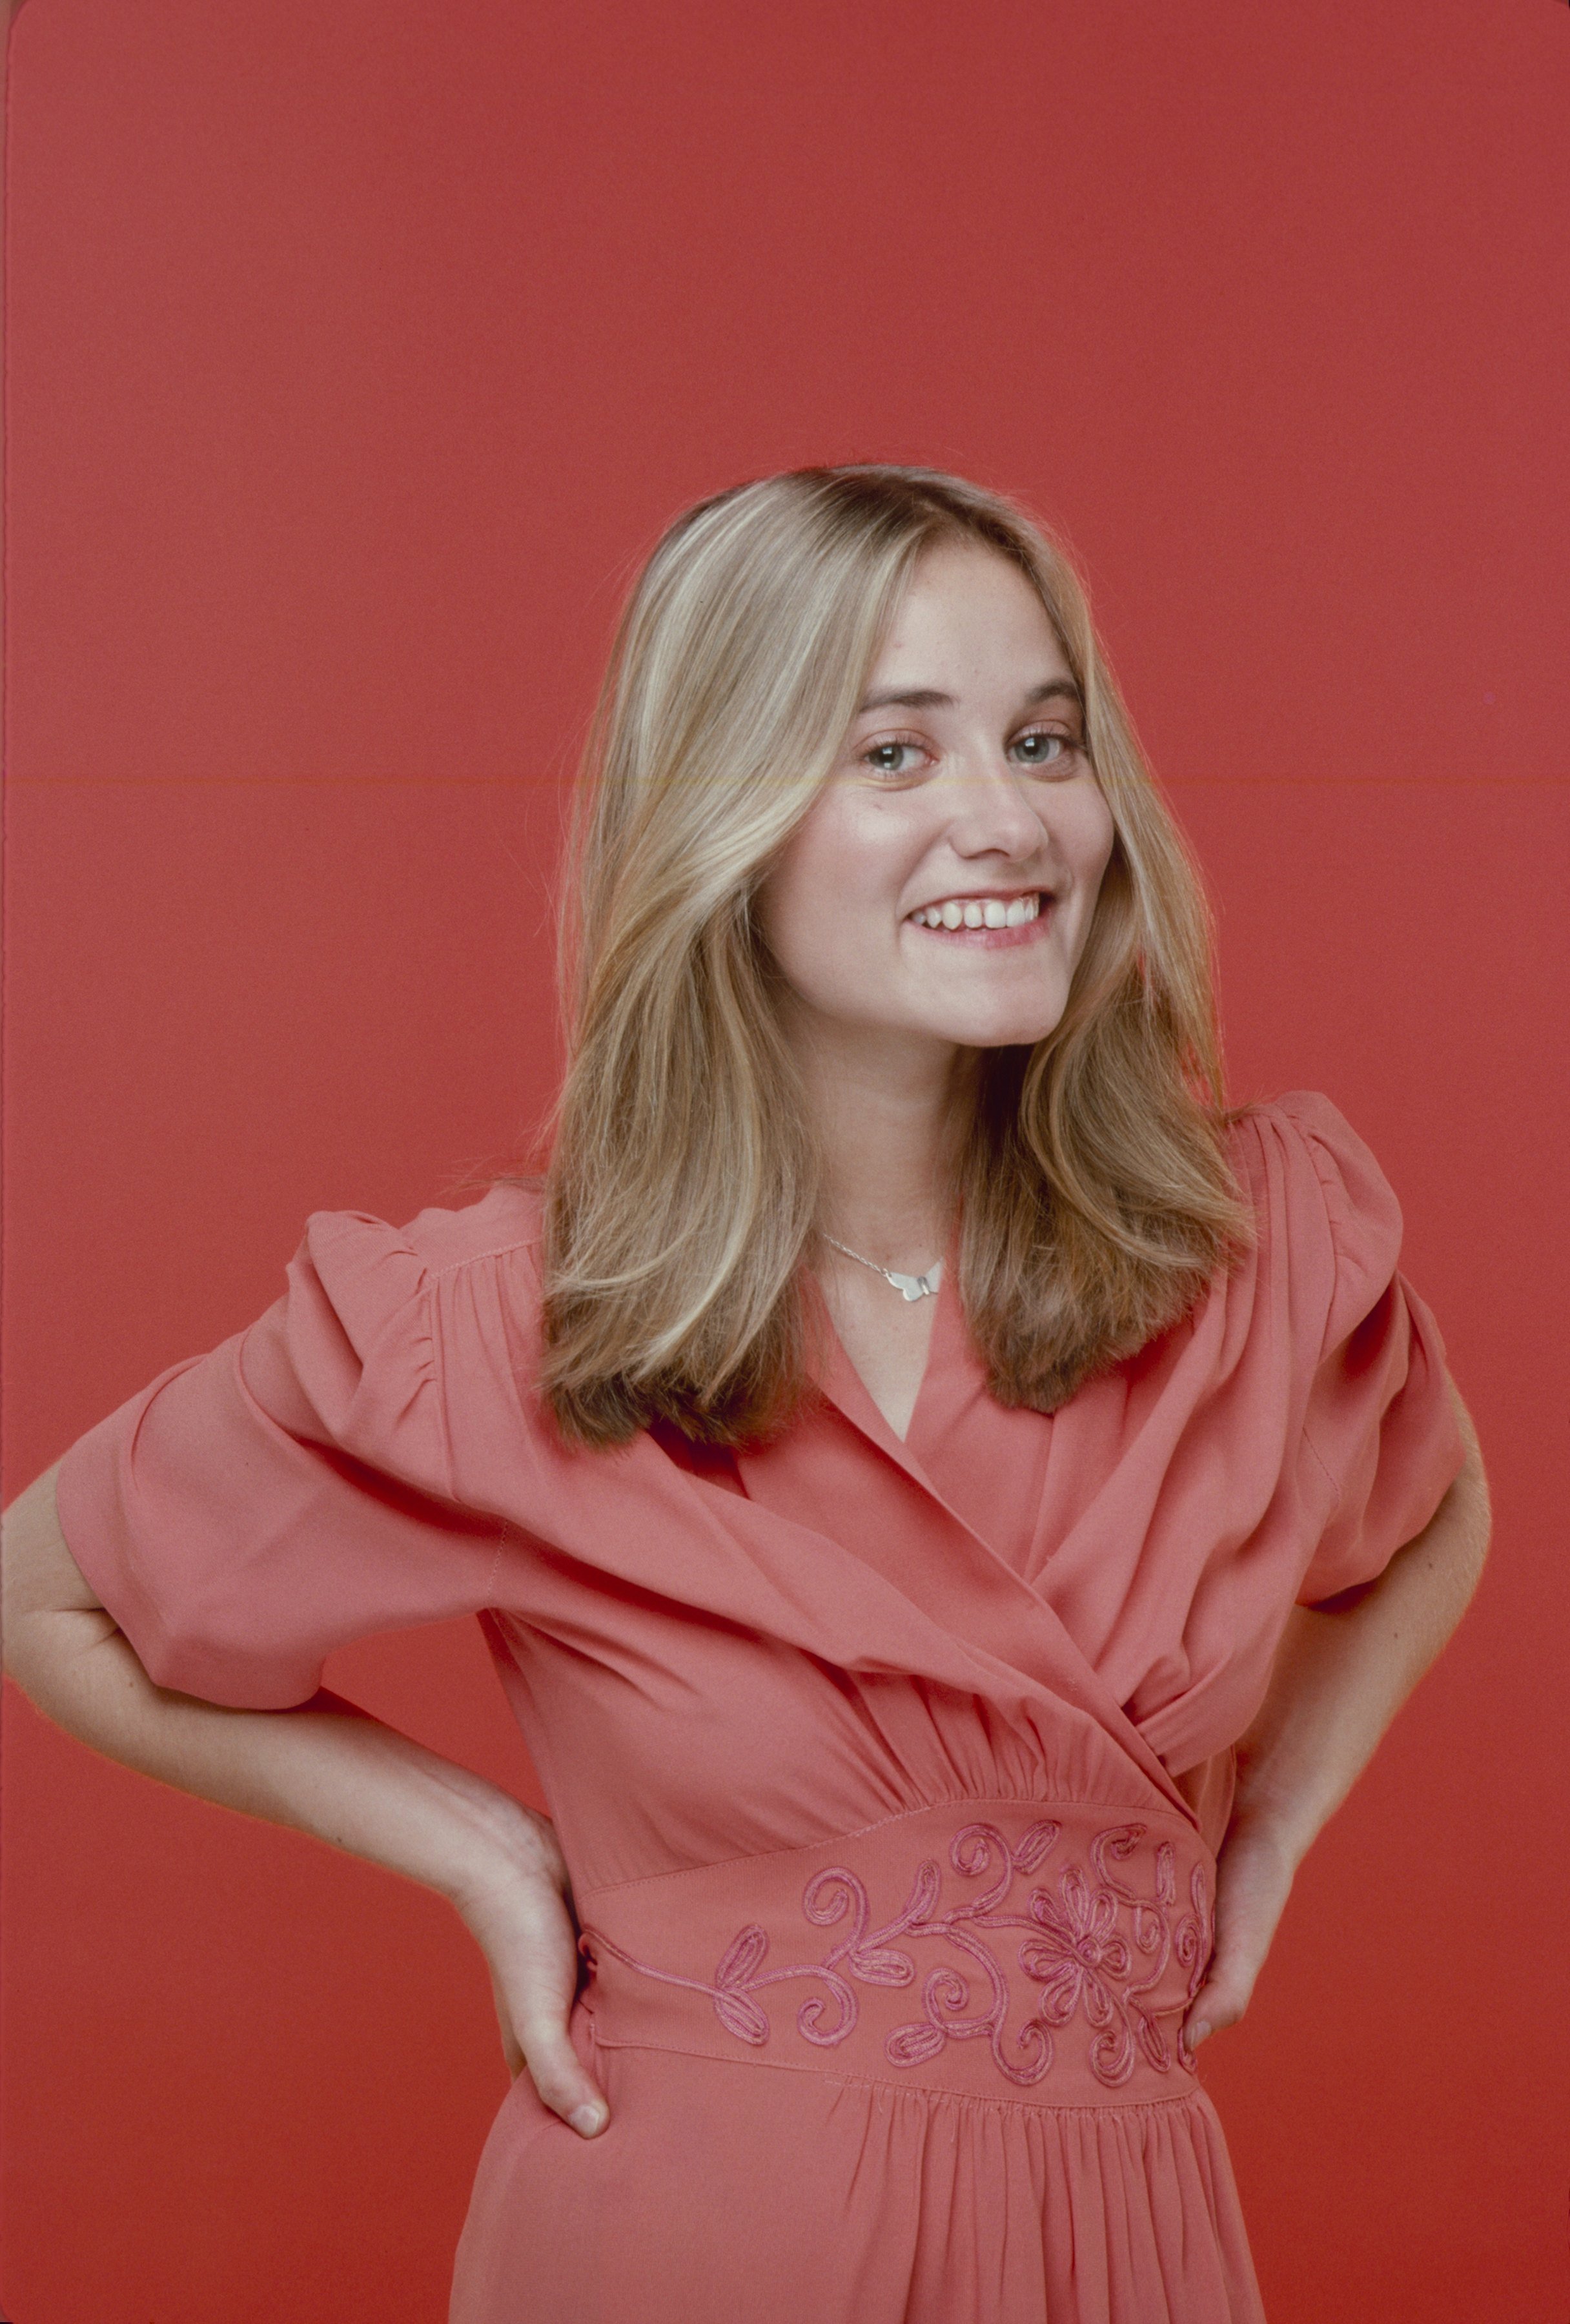 Maureen McCormick in November 1976 | Source: Getty Images